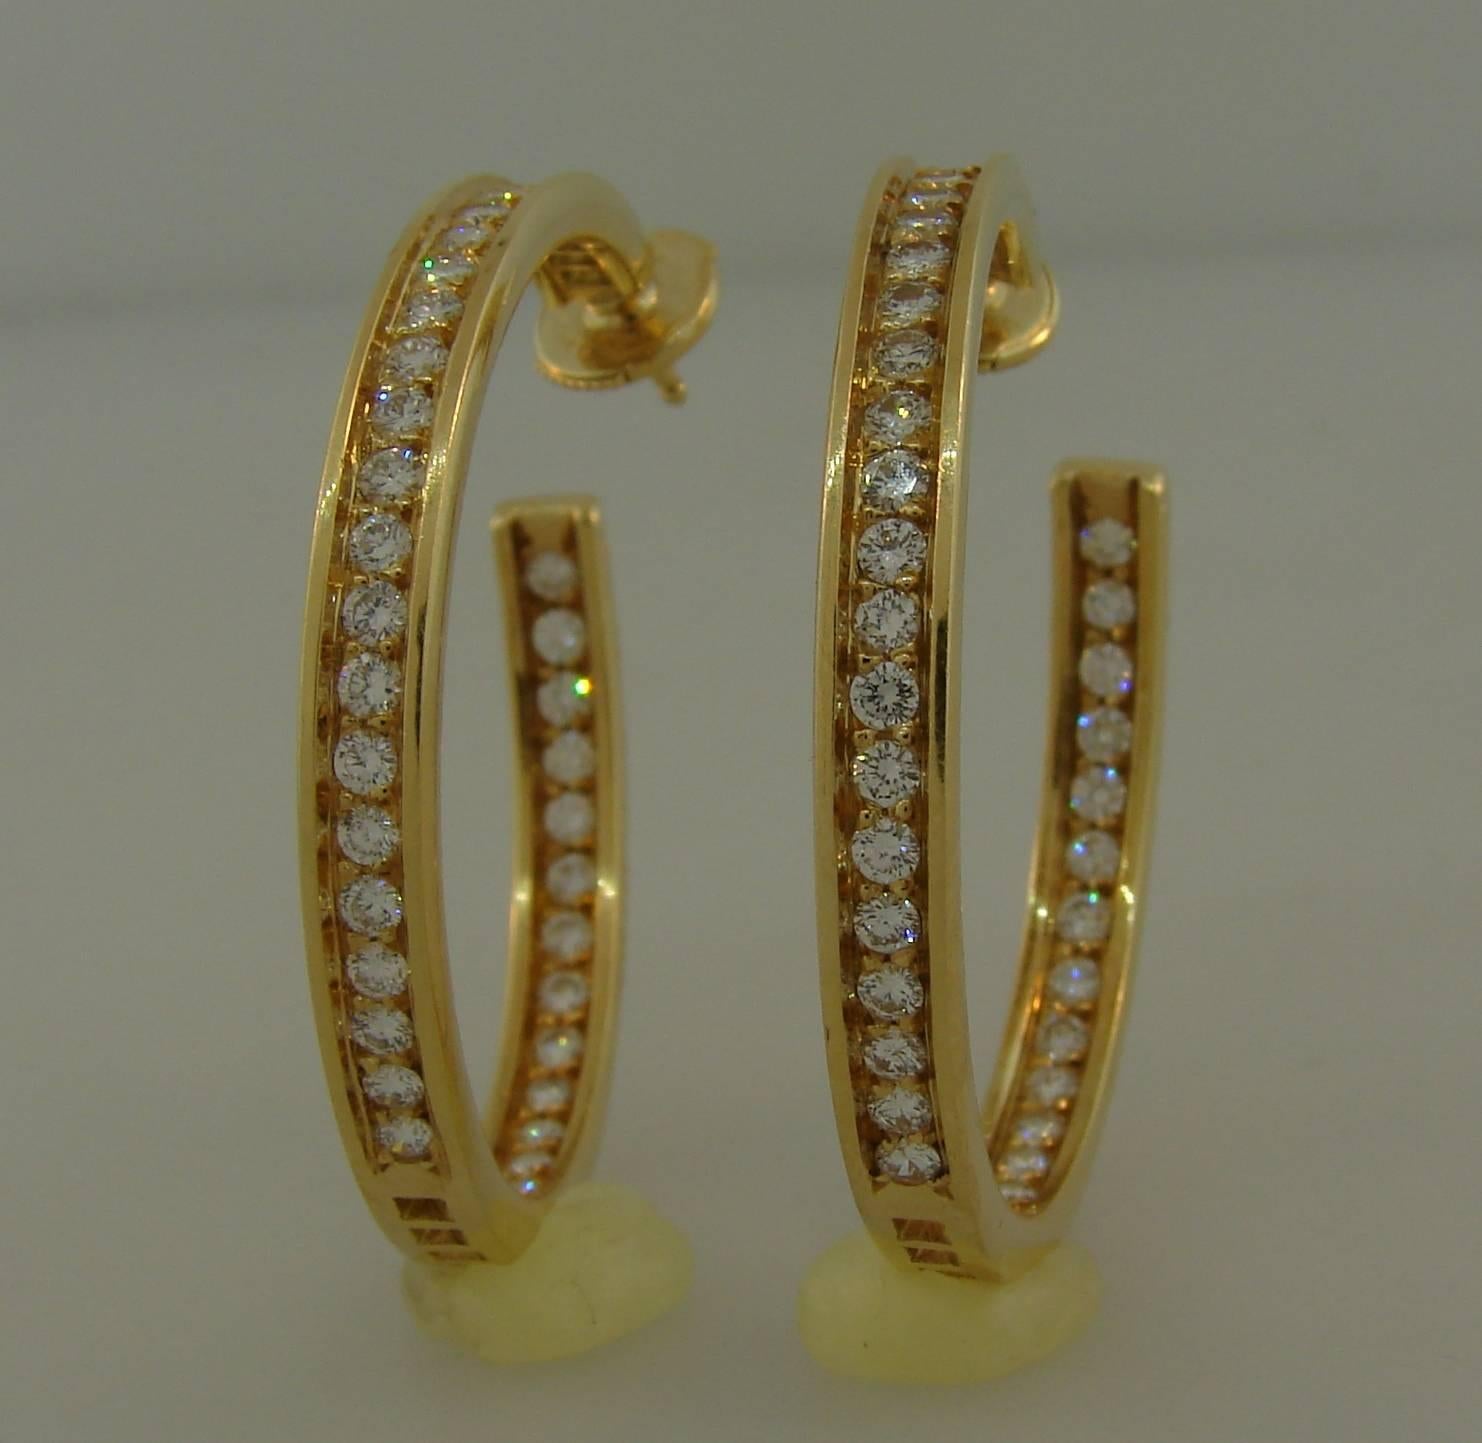 Chic and wearable hoop earrings that are a 